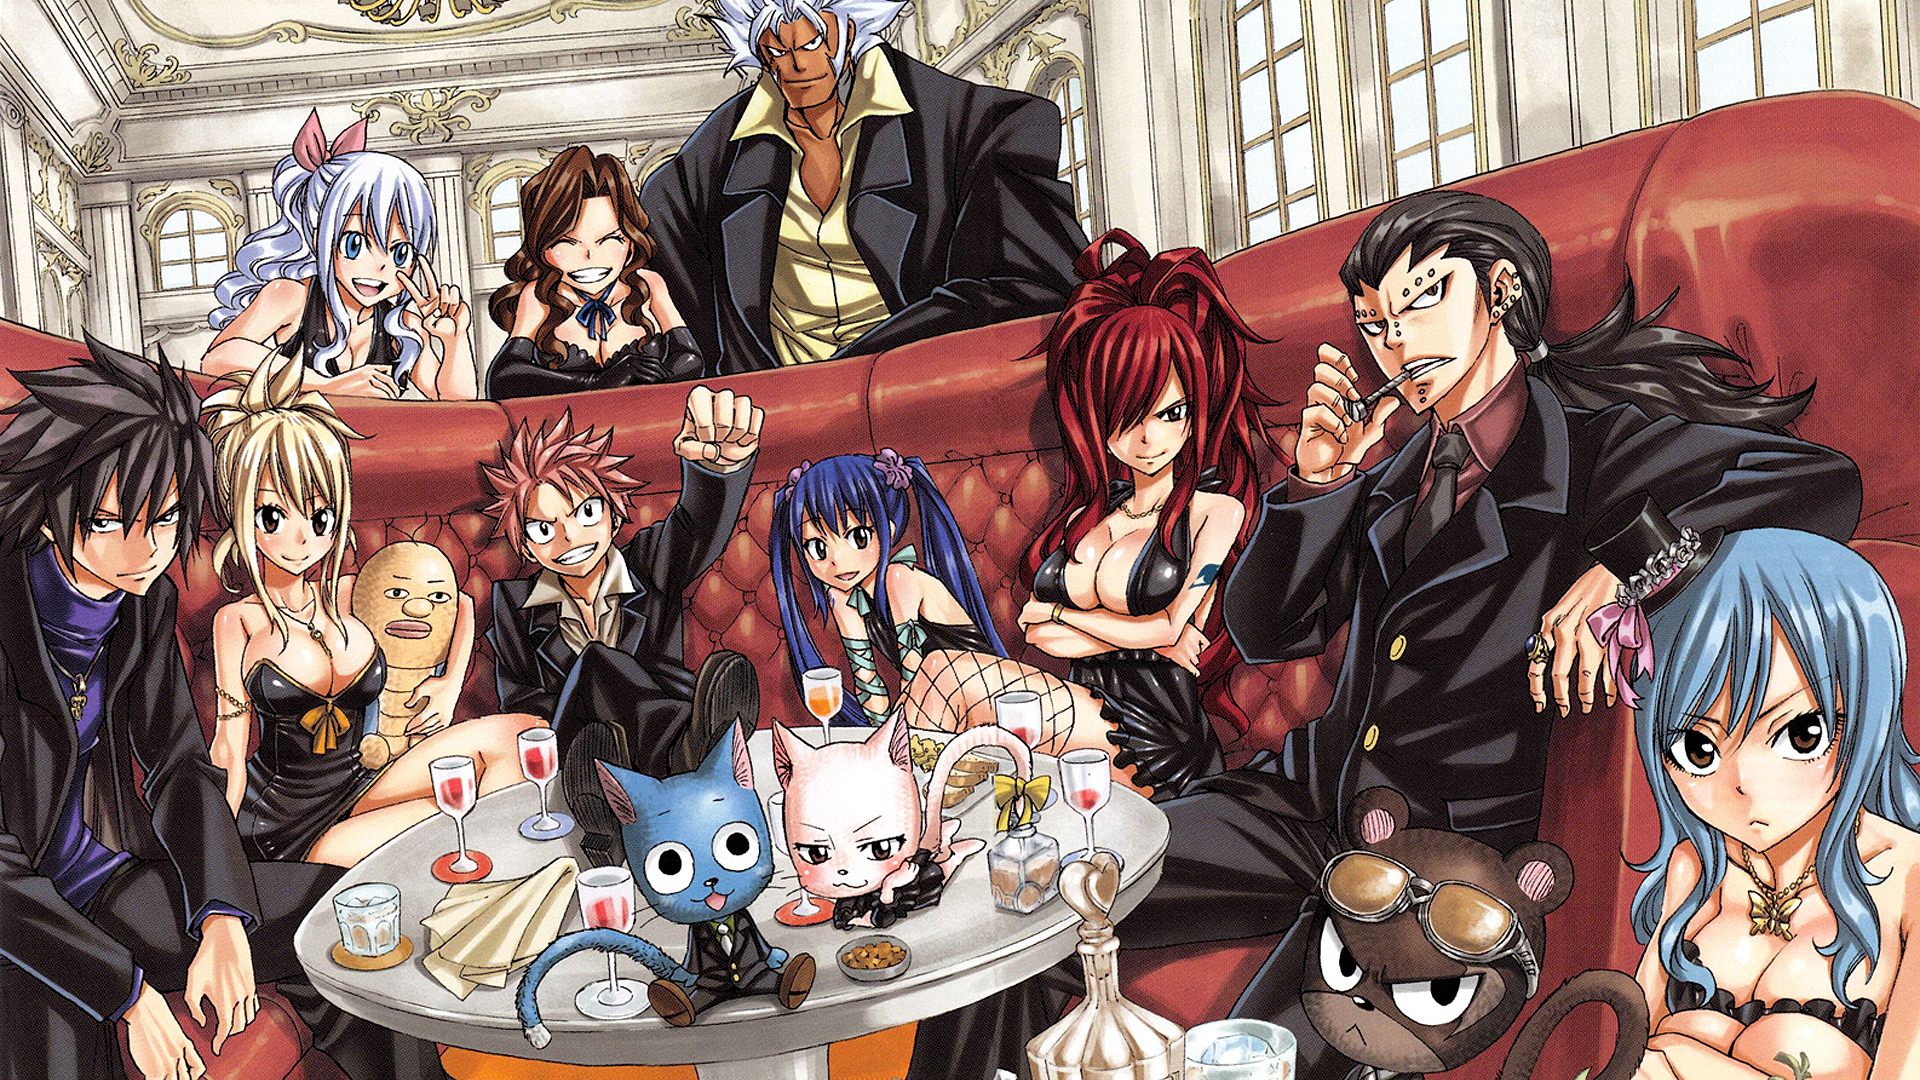 Happy - Fairy Tail wallpaper - Anime wallpapers - #26424